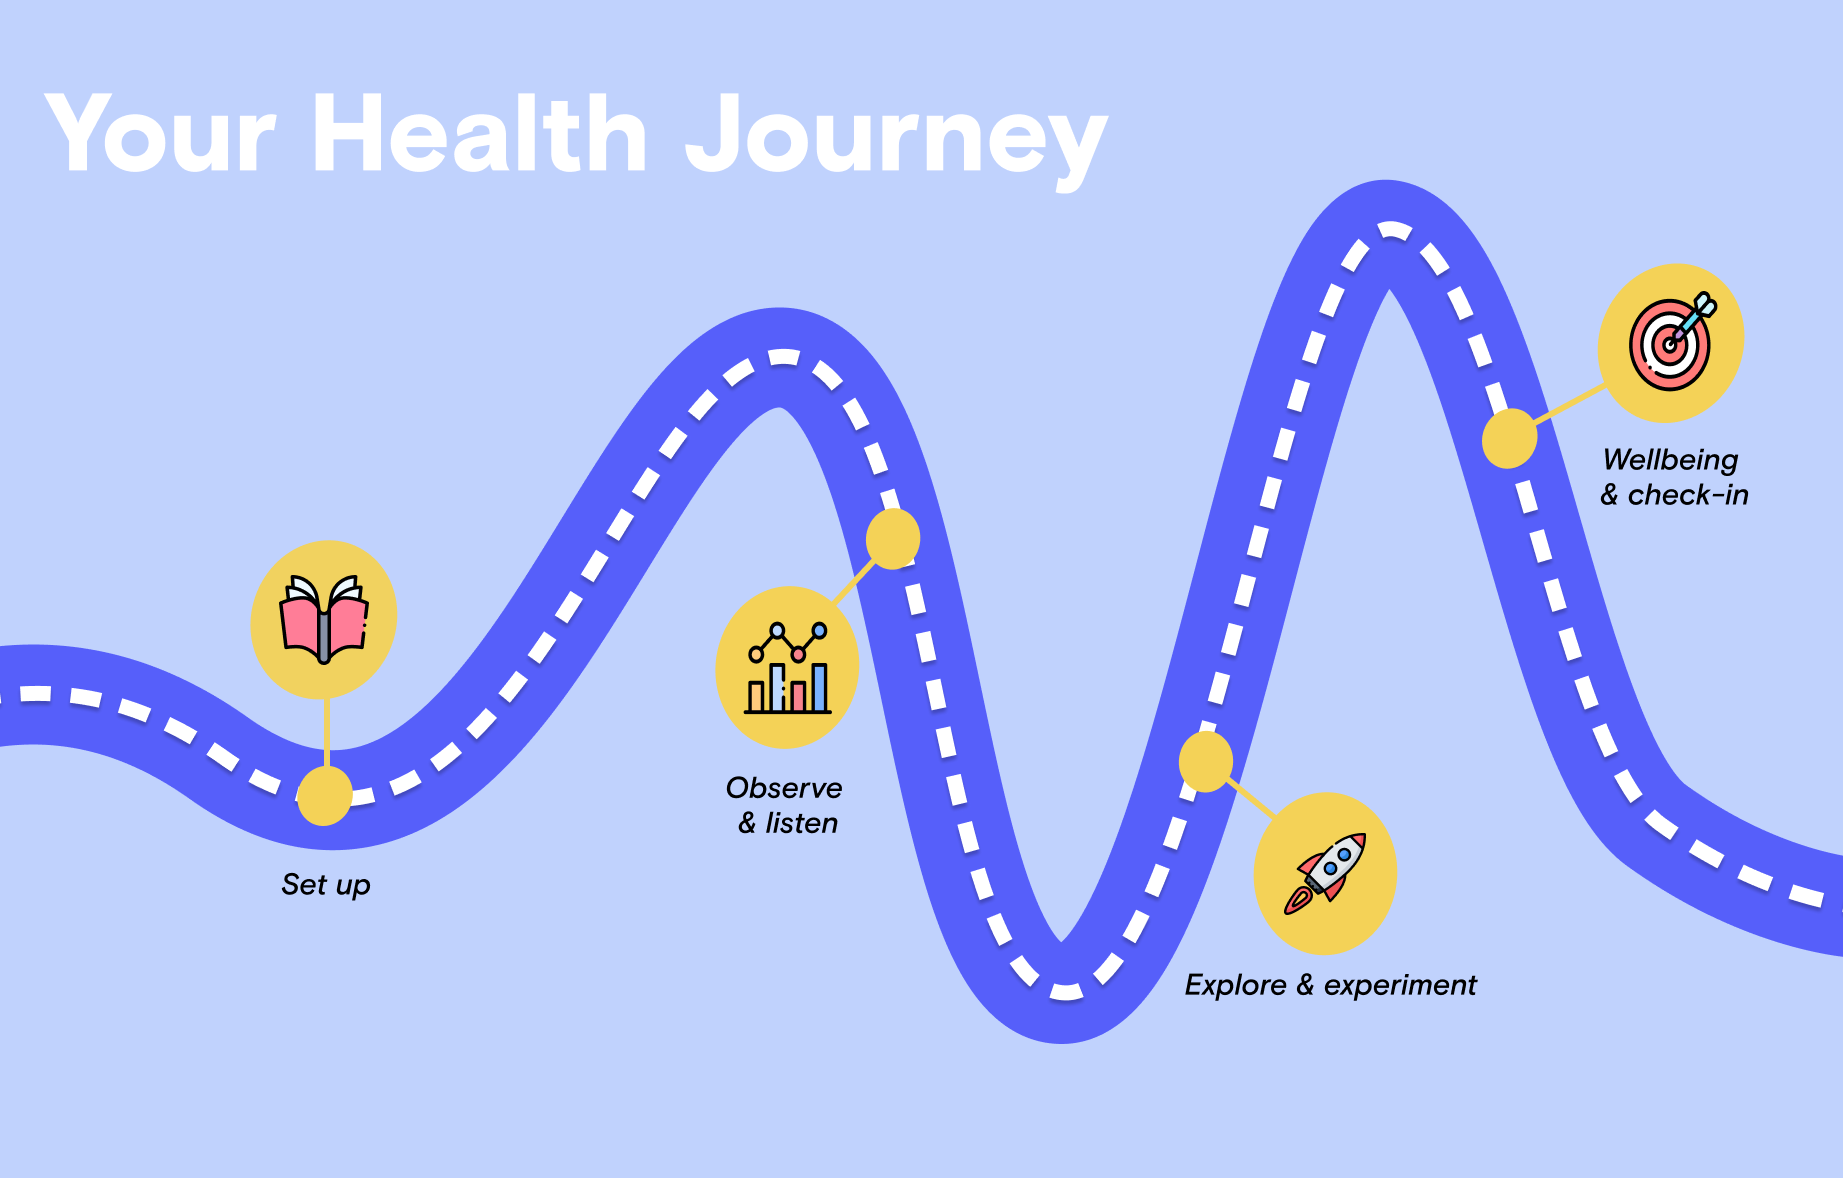 Your health journey